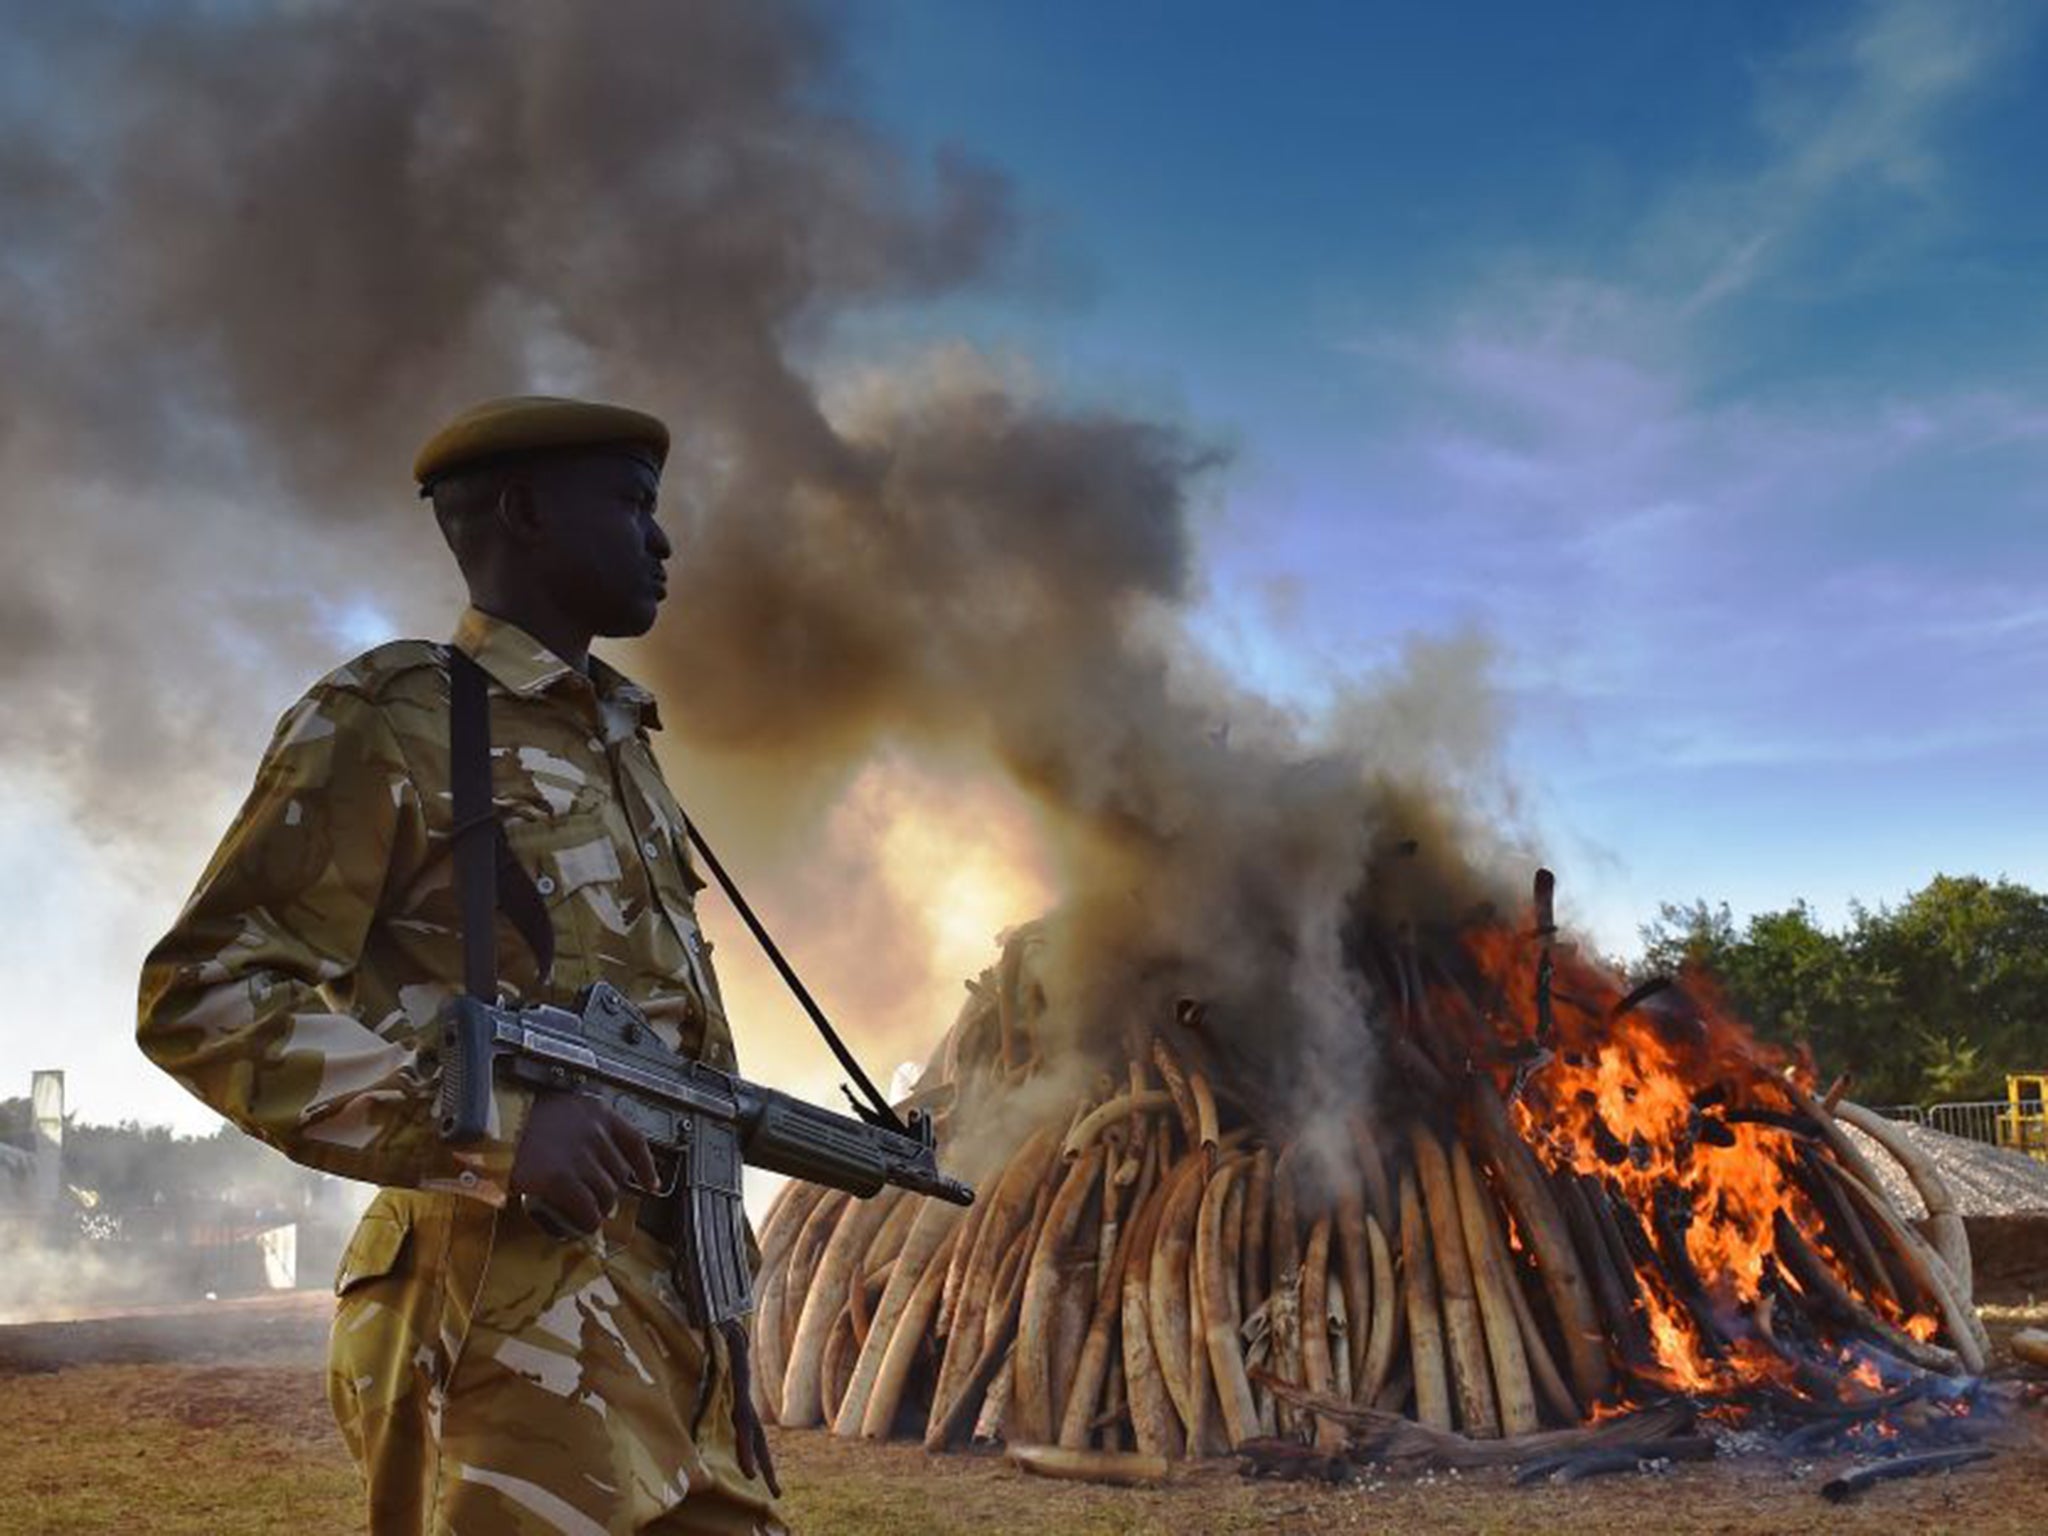 A security officer stands guard over a burning pile of 15 tonnes of elephant ivory in Africa